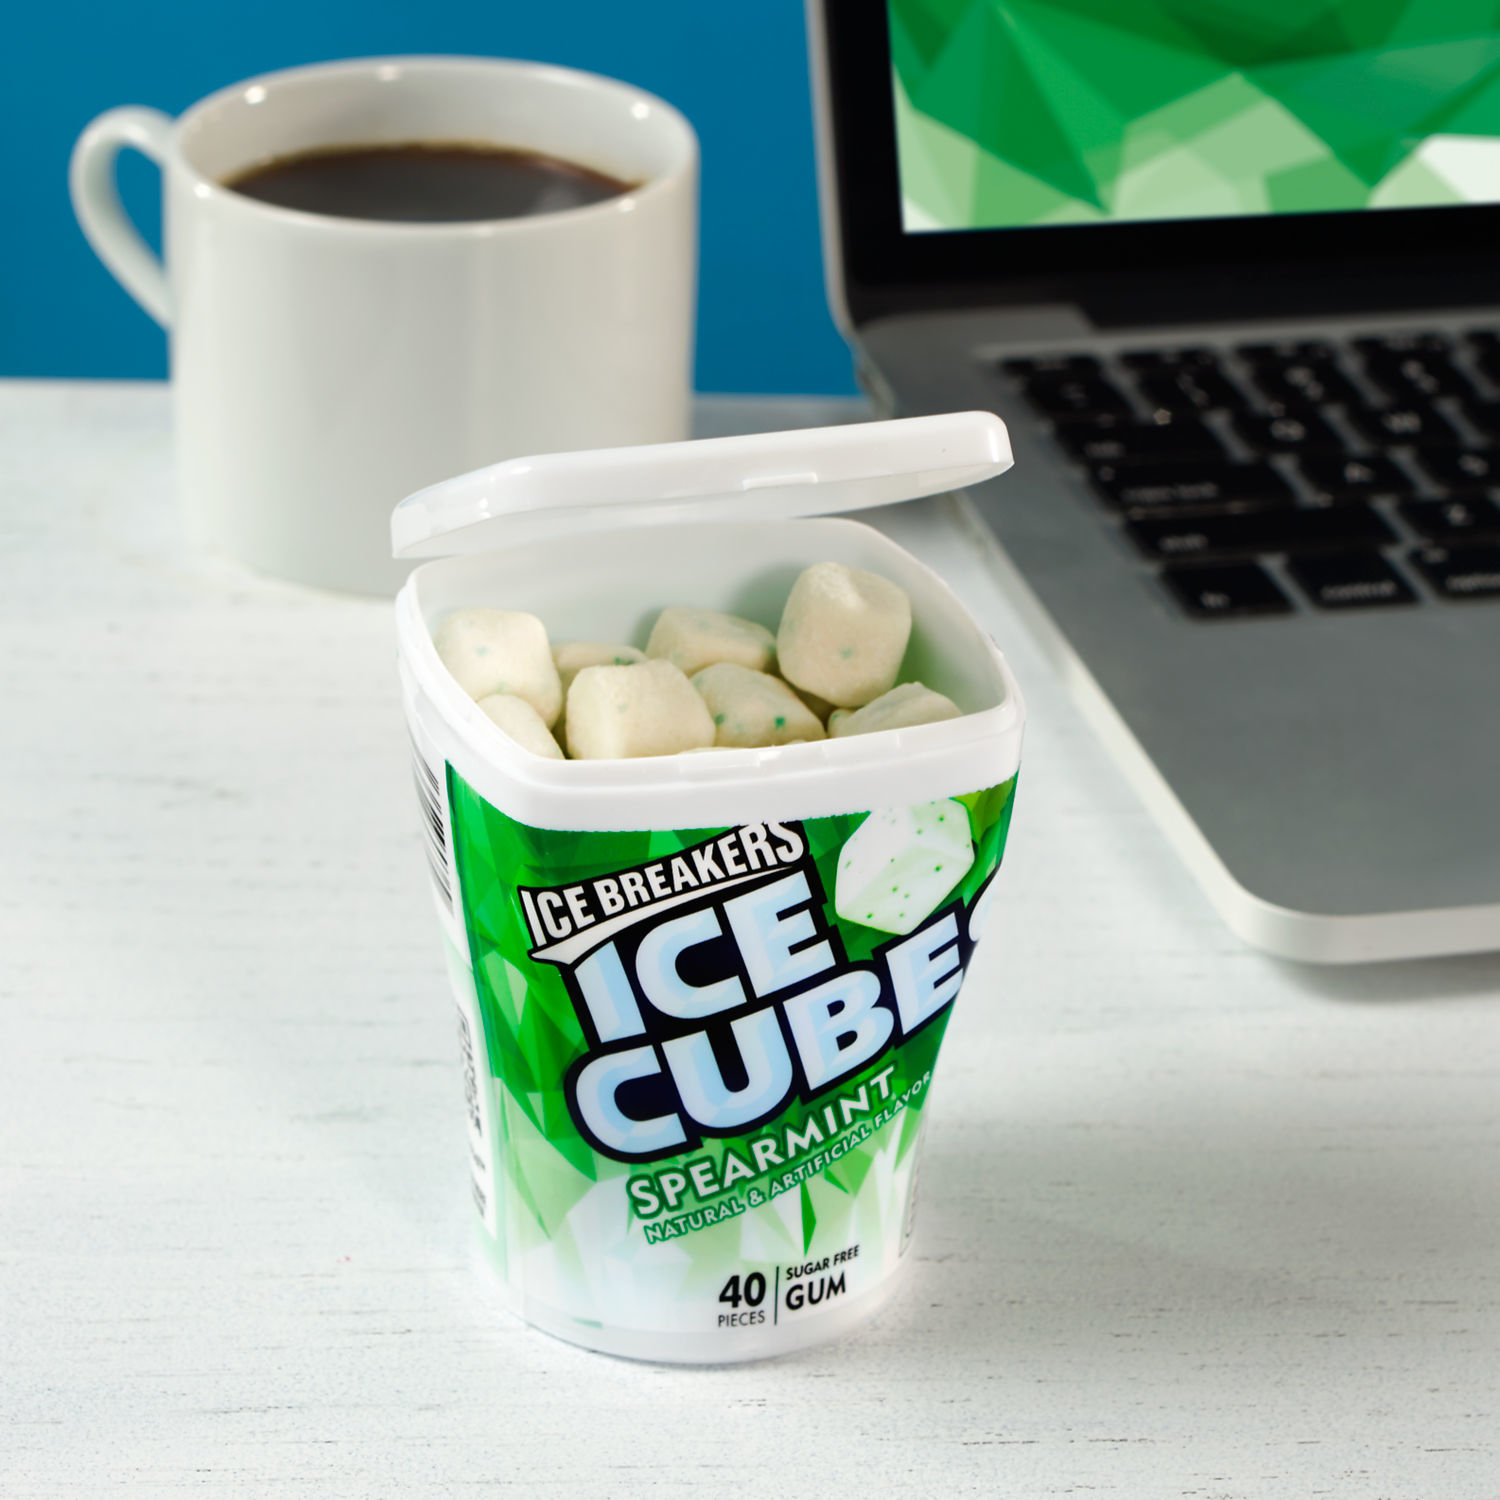 Ice Breakers Ice Cubes Spearmint Sugar Free Chewing Gum, Bottle 3.24 oz, 40 Pieces - image 4 of 8